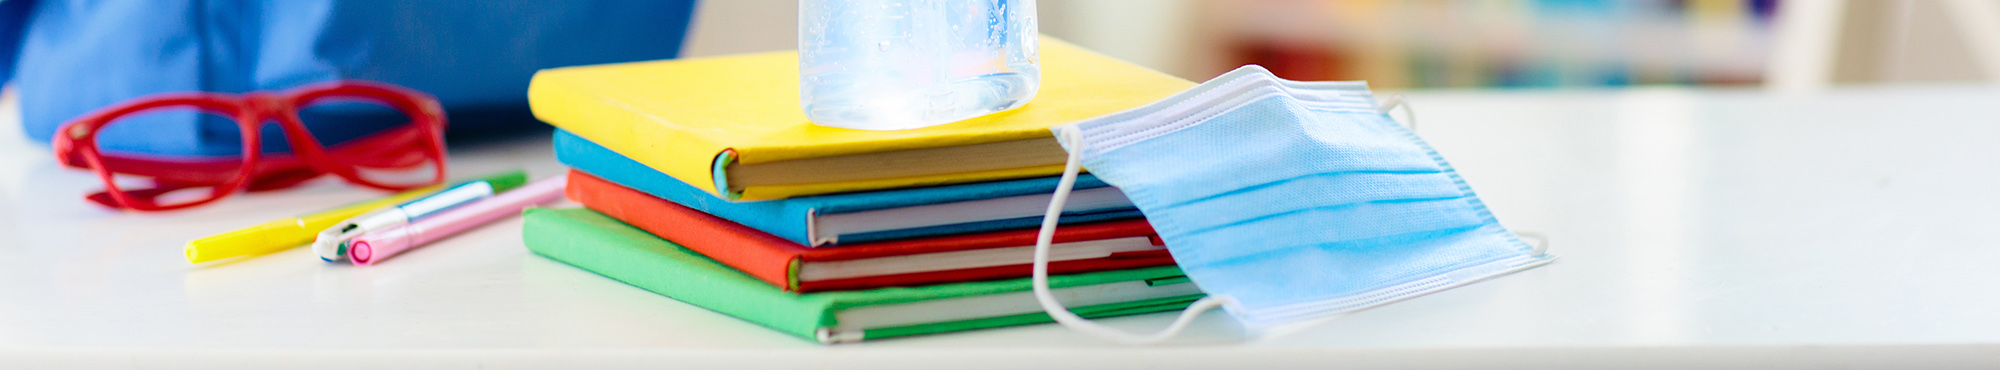 Child's backpack on table with books, glasses, and face mask